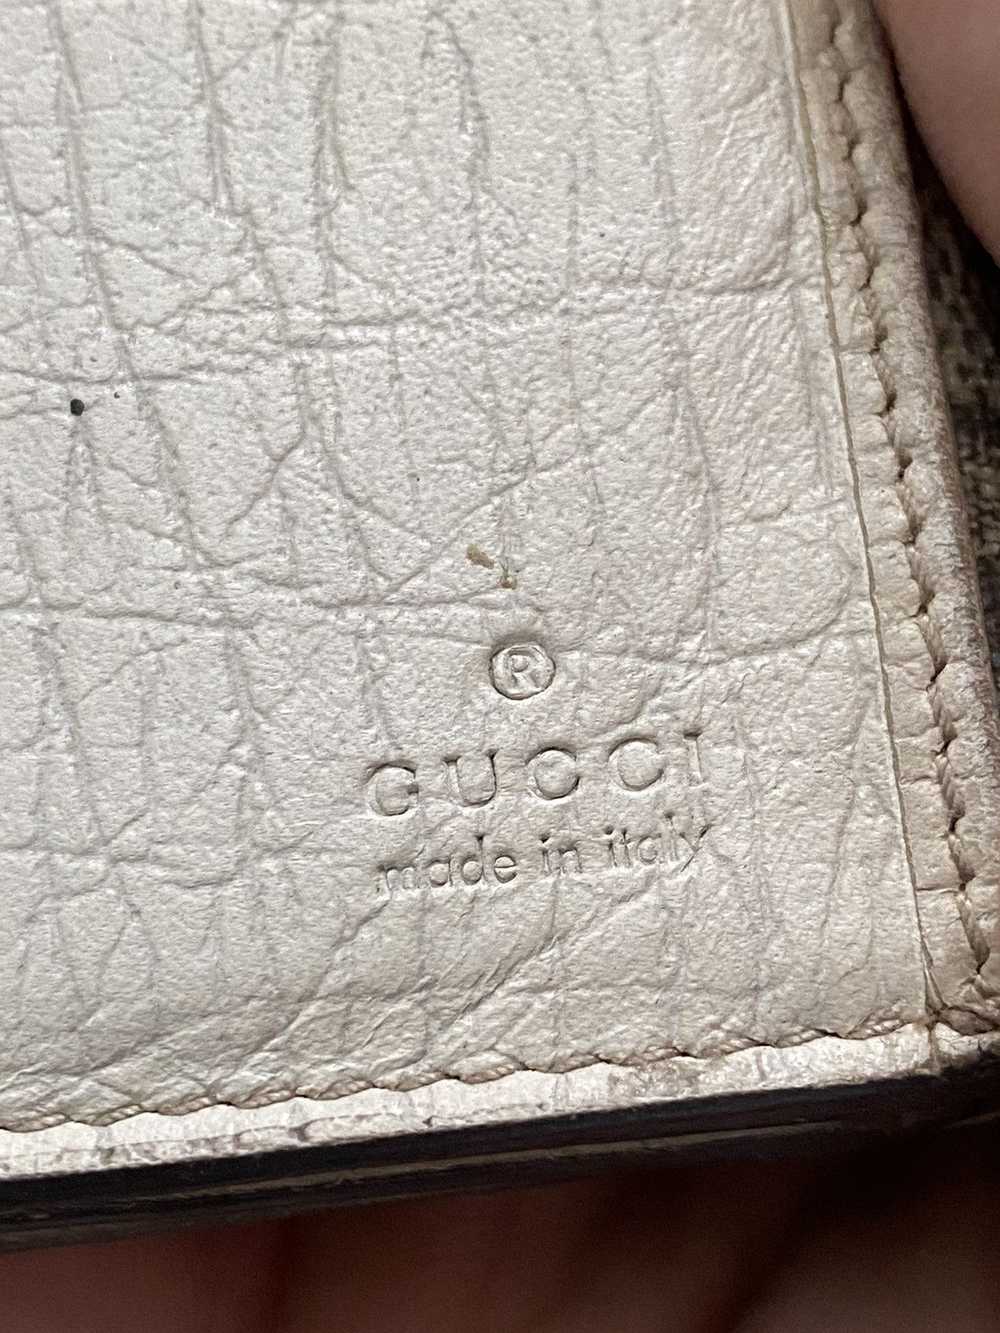 Gucci Gucci GG Monogram leather long wallet - image 4